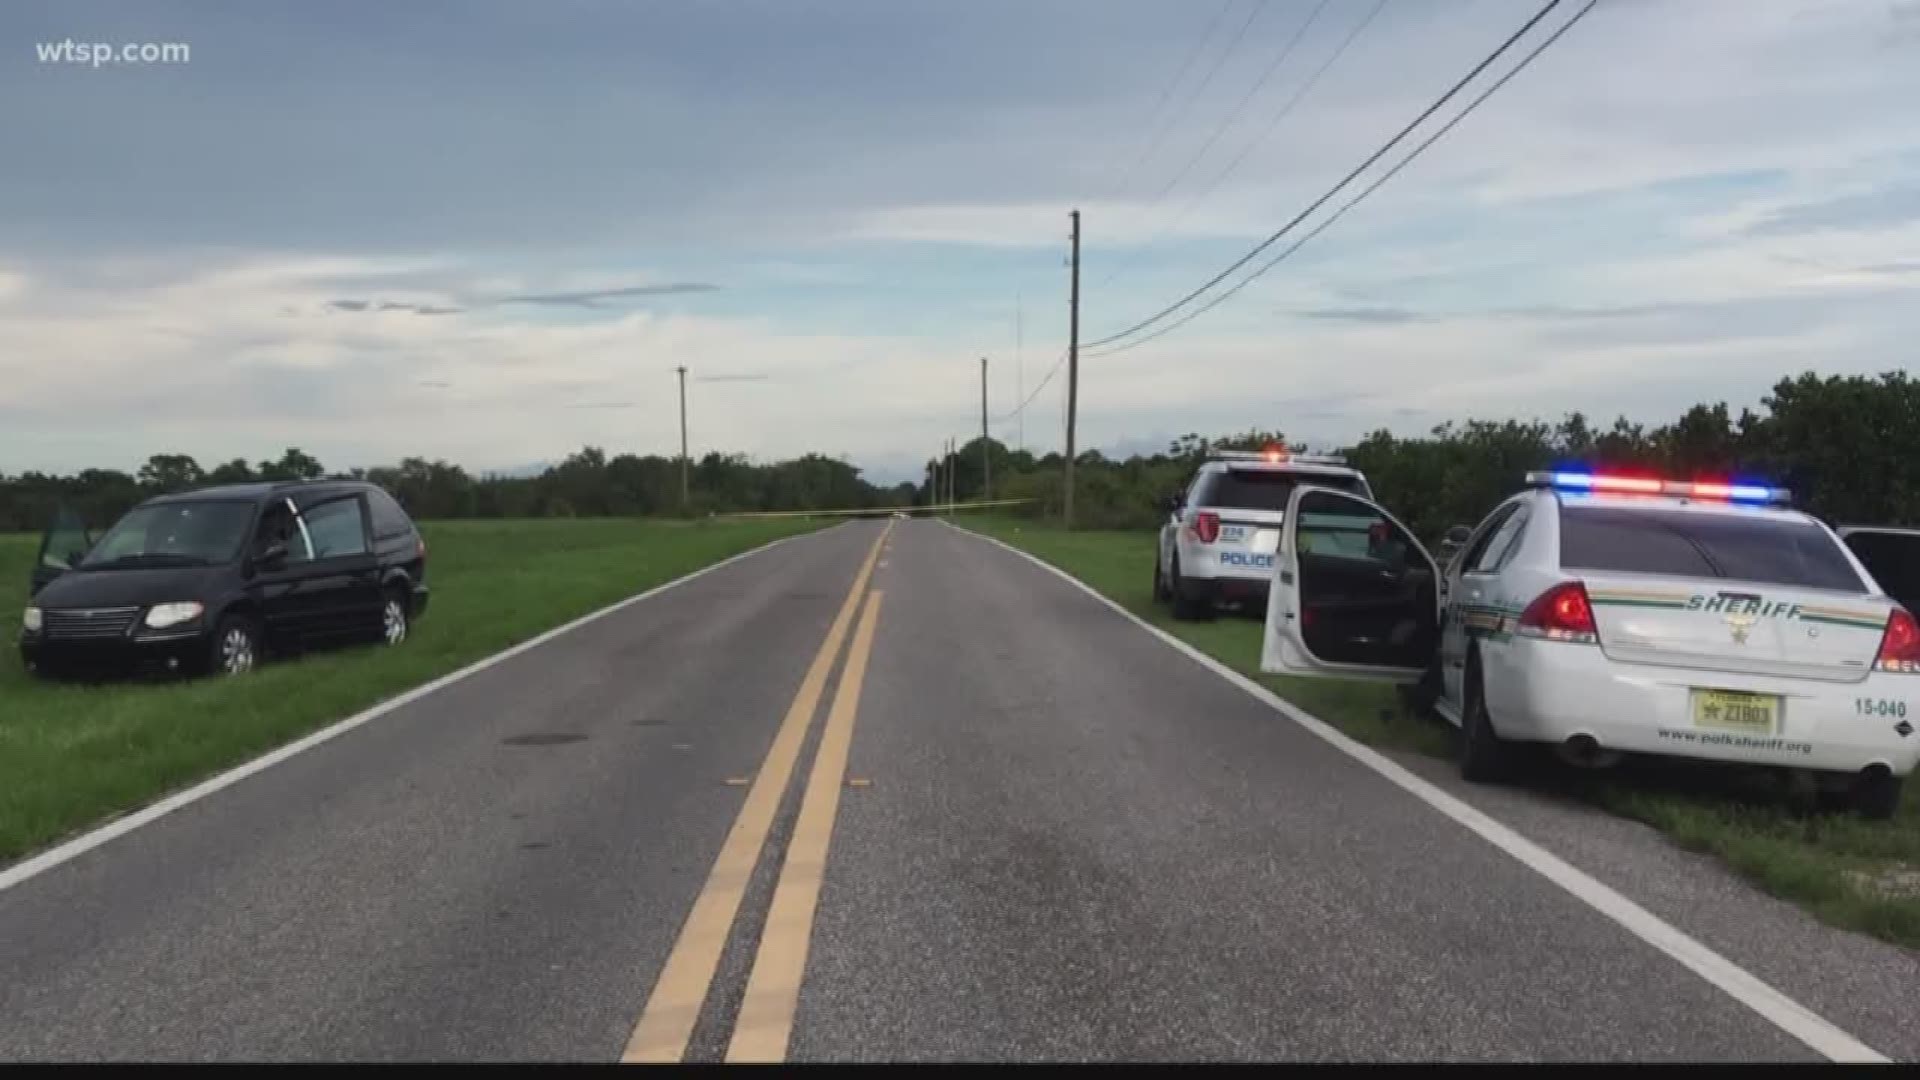 The Polk County Sheriff’s Office said a woman was shot Saturday by a deputy.

Deputies were responding around 5 p.m. to a call of a mother and daughter fighting in a minivan on Carl Boozer Road near Powerline Road.

Investigators said a man called 911 and said he was driving down Carl Boozer Road when he saw two women fighting in the pulled-over minivan. Deputies said the caller heard the victim yell that the suspect was going to shoot her. 

When law enforcement arrived on the scene they said they saw the two women fighting in the van.

Deputy Christopher Johnston, 52, reported 47-year-old Wendy Schutte told him 76-year-old Linda Wages had a gun. Wages ignored law enforcement's commands and the victim continued to scream that her mother was going to shoot her, according to investigators. 

Investigators said the Wages ducked down and came back up, so the deputy fired at the suspect because he feared for his life and the victim's life. 

The suspect was taken to the hospital and treated for non-life-threatening gunshot wounds, the sheriff's office said. Schutte appeared to have injuries associated with being battered, it added.

The sheriff's office said no deputies were injured. 

The deputy sheriff will be on paid administrative leave as the shooting is investigated, per standard protocol.